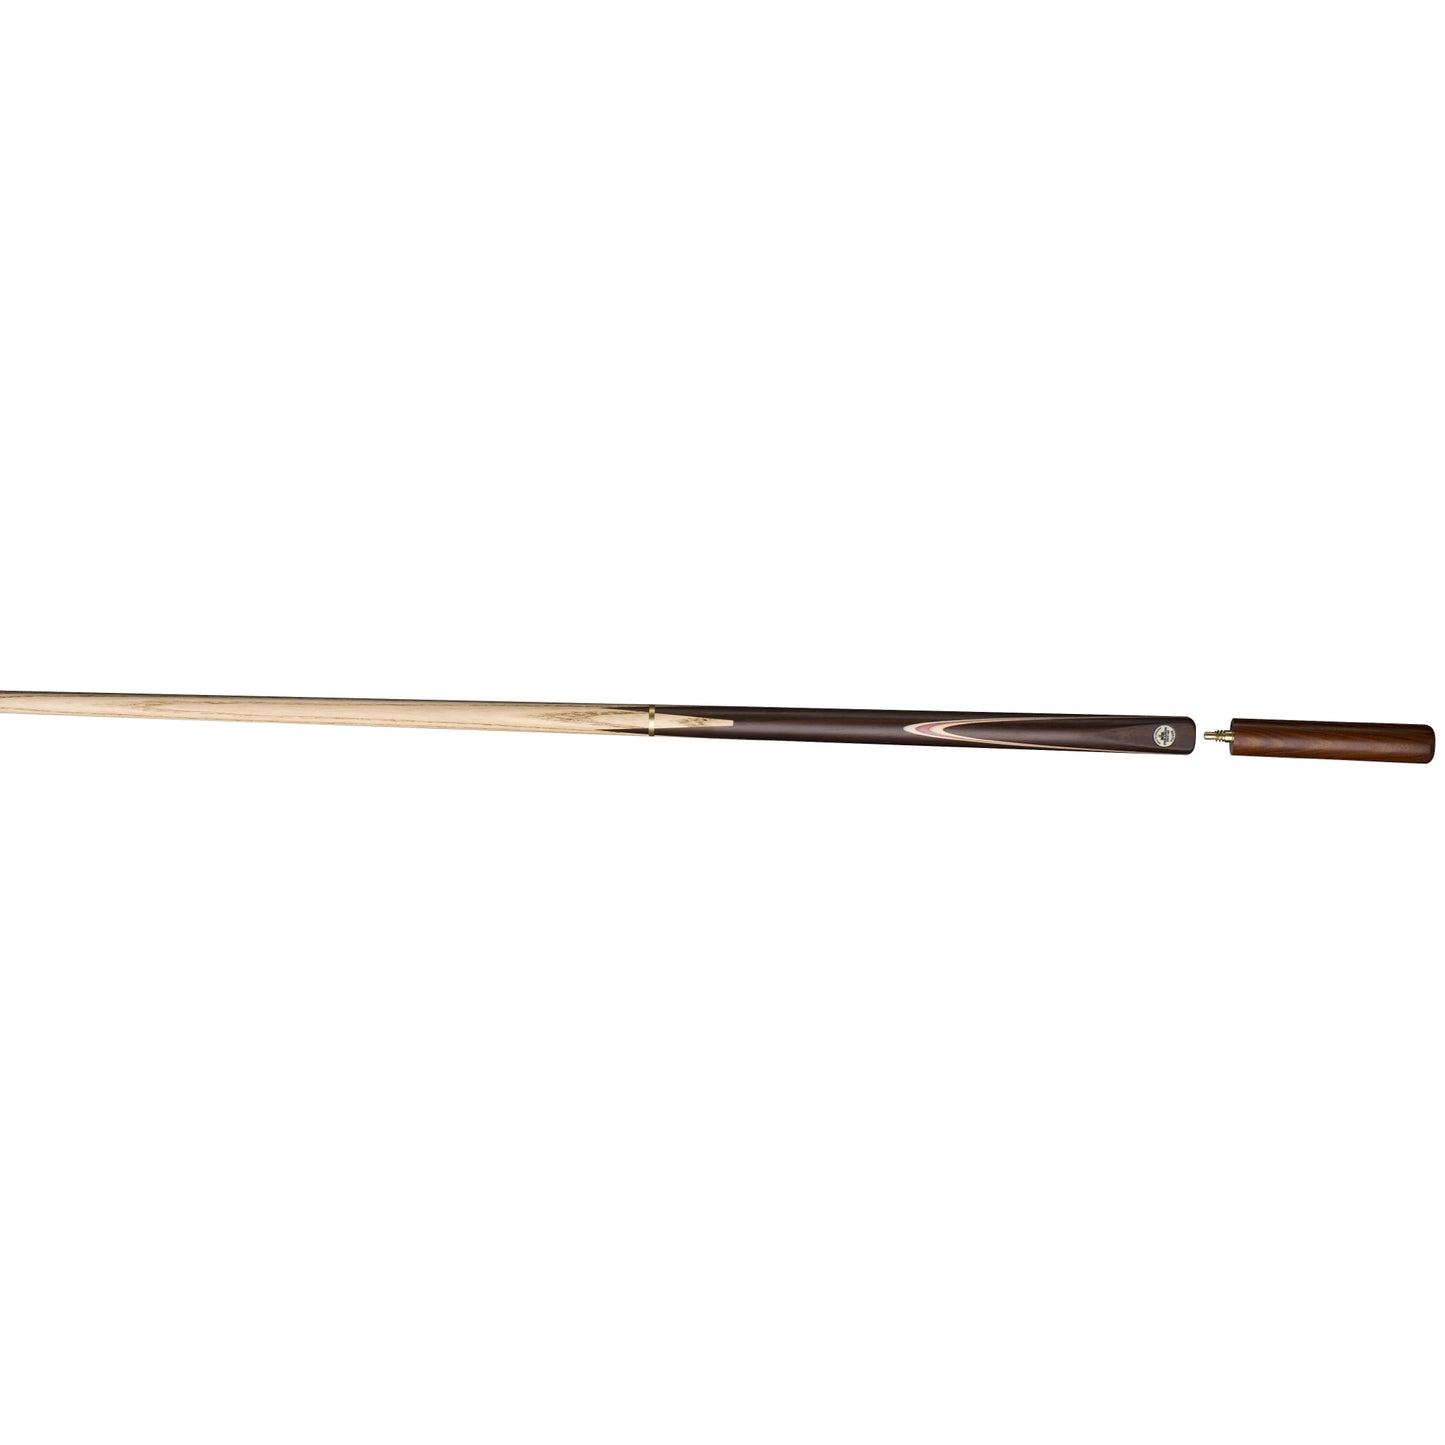 Peradon Pulsar ¾ Jointed 8 Ball Pool Cue with Mini Butt